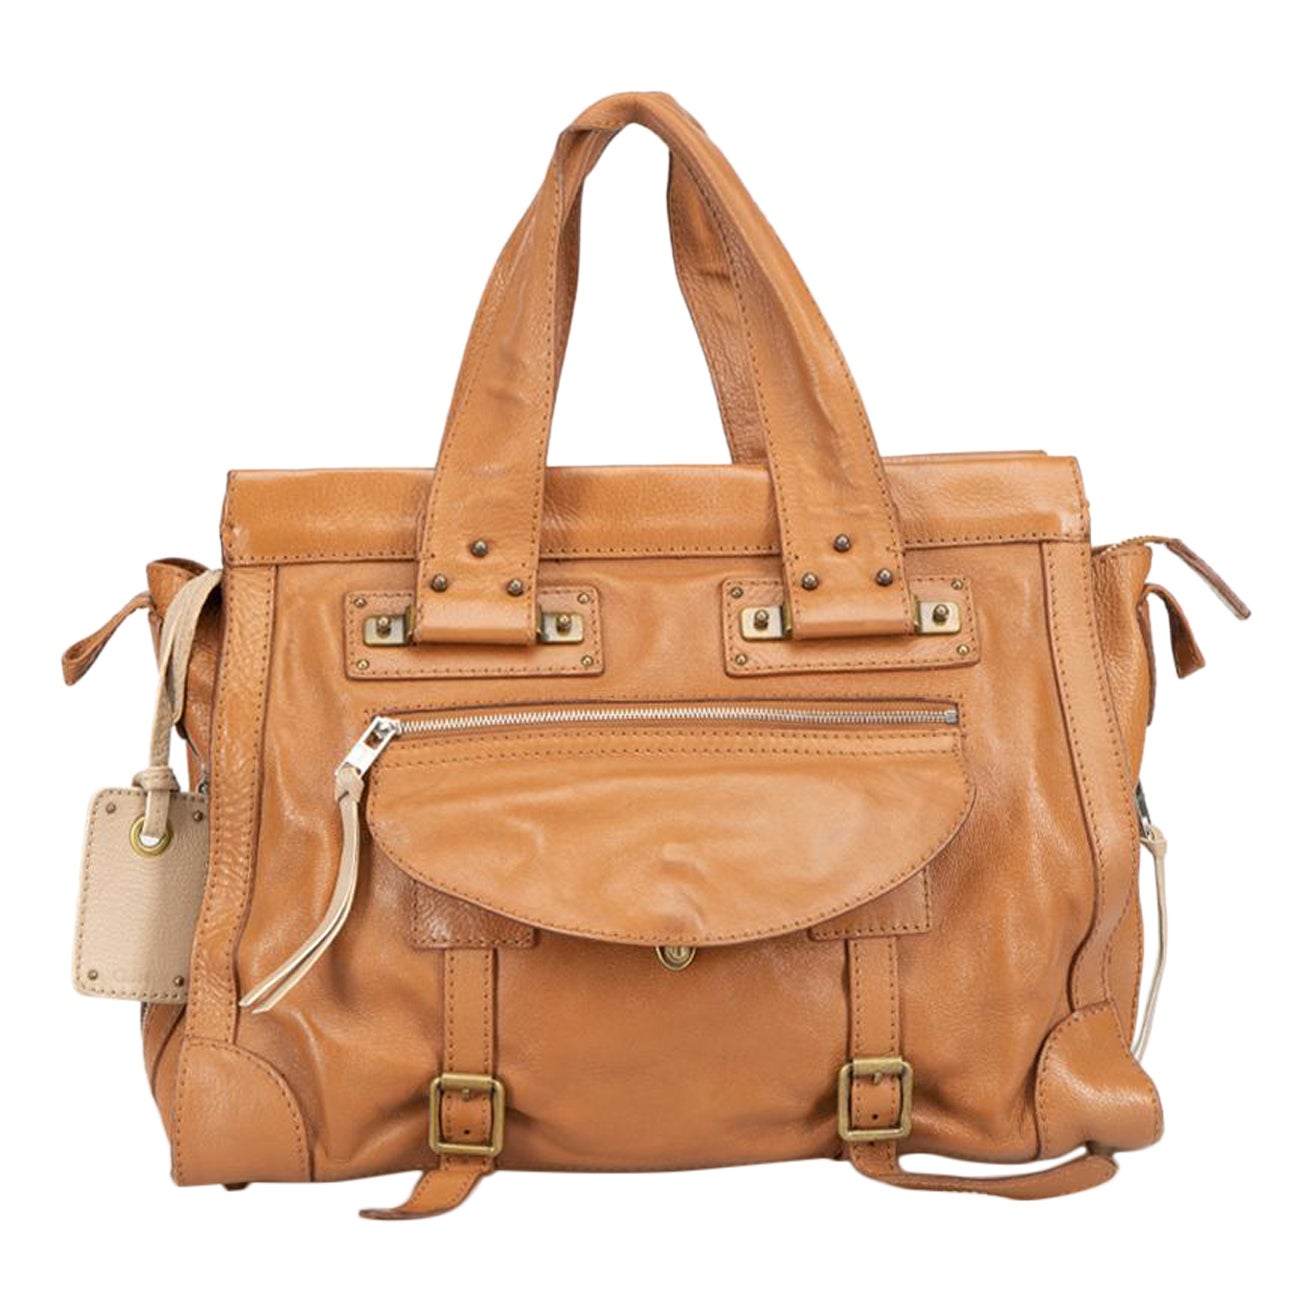 Chloé Women's Brown Calfskin Leather Tracy Tote Bag